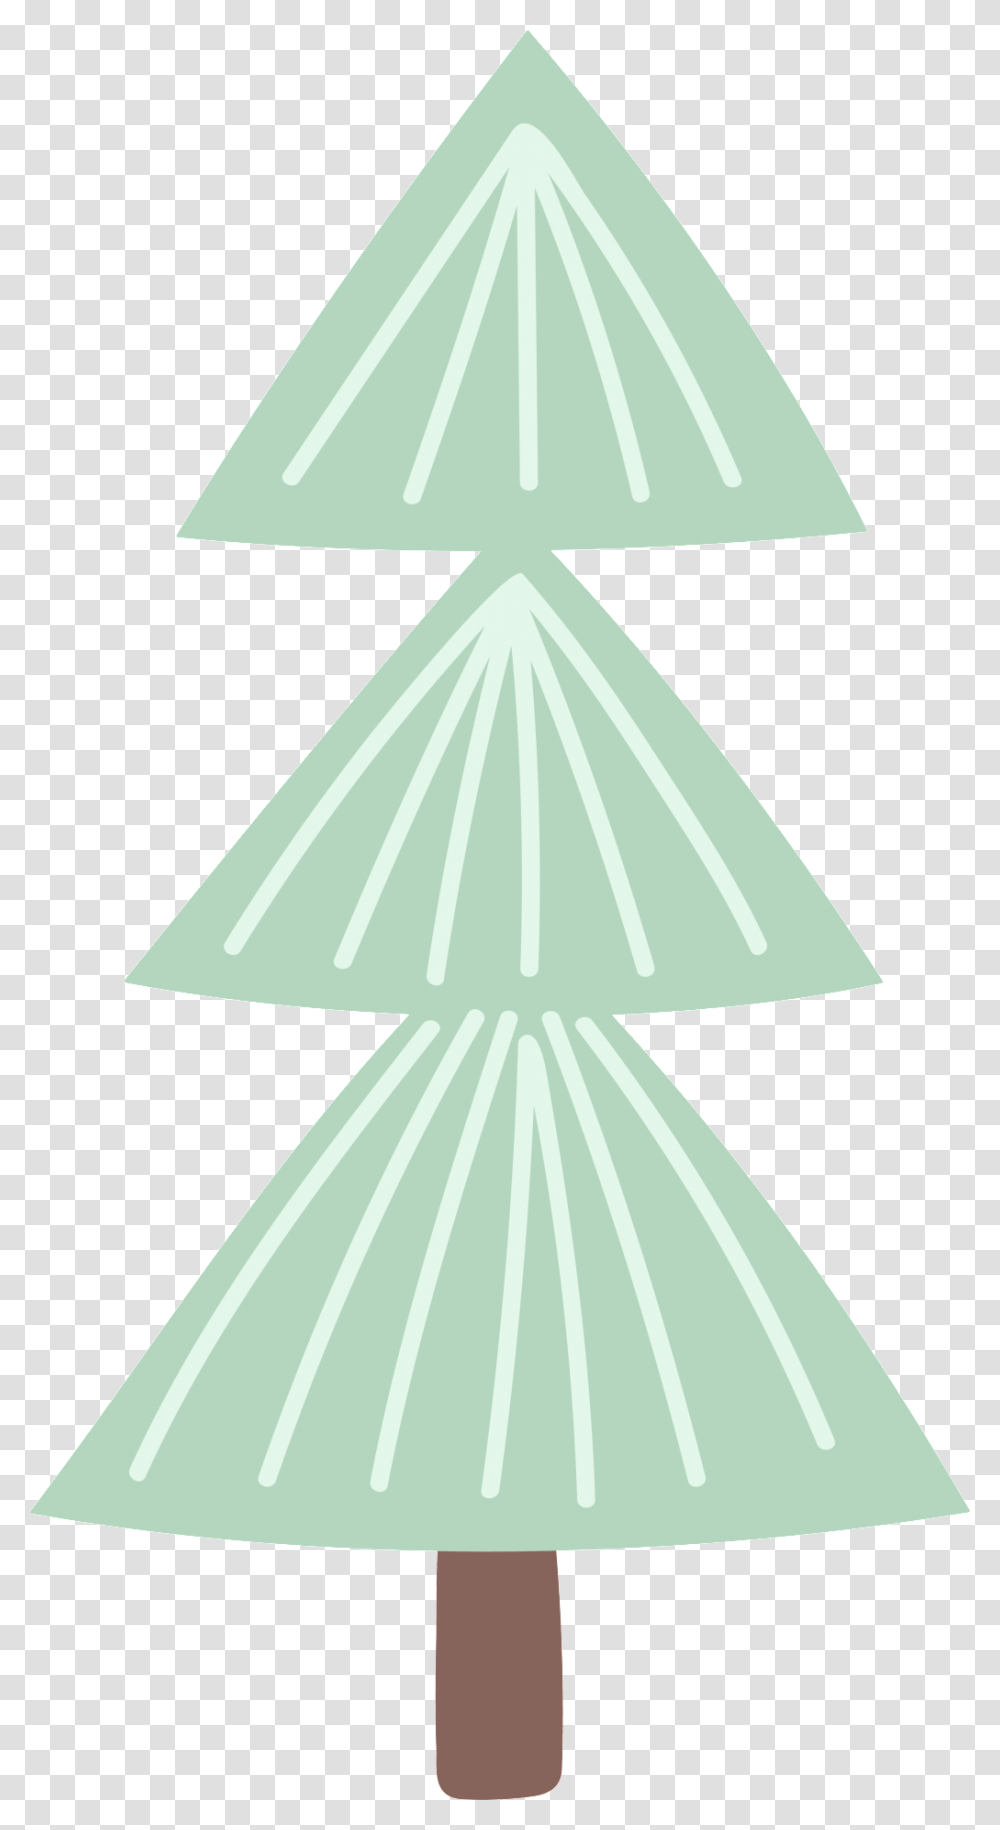 Triangle Branch Christmas Cartoon Christmas Tree, Lighting, Lamp, Paper, Icing Transparent Png